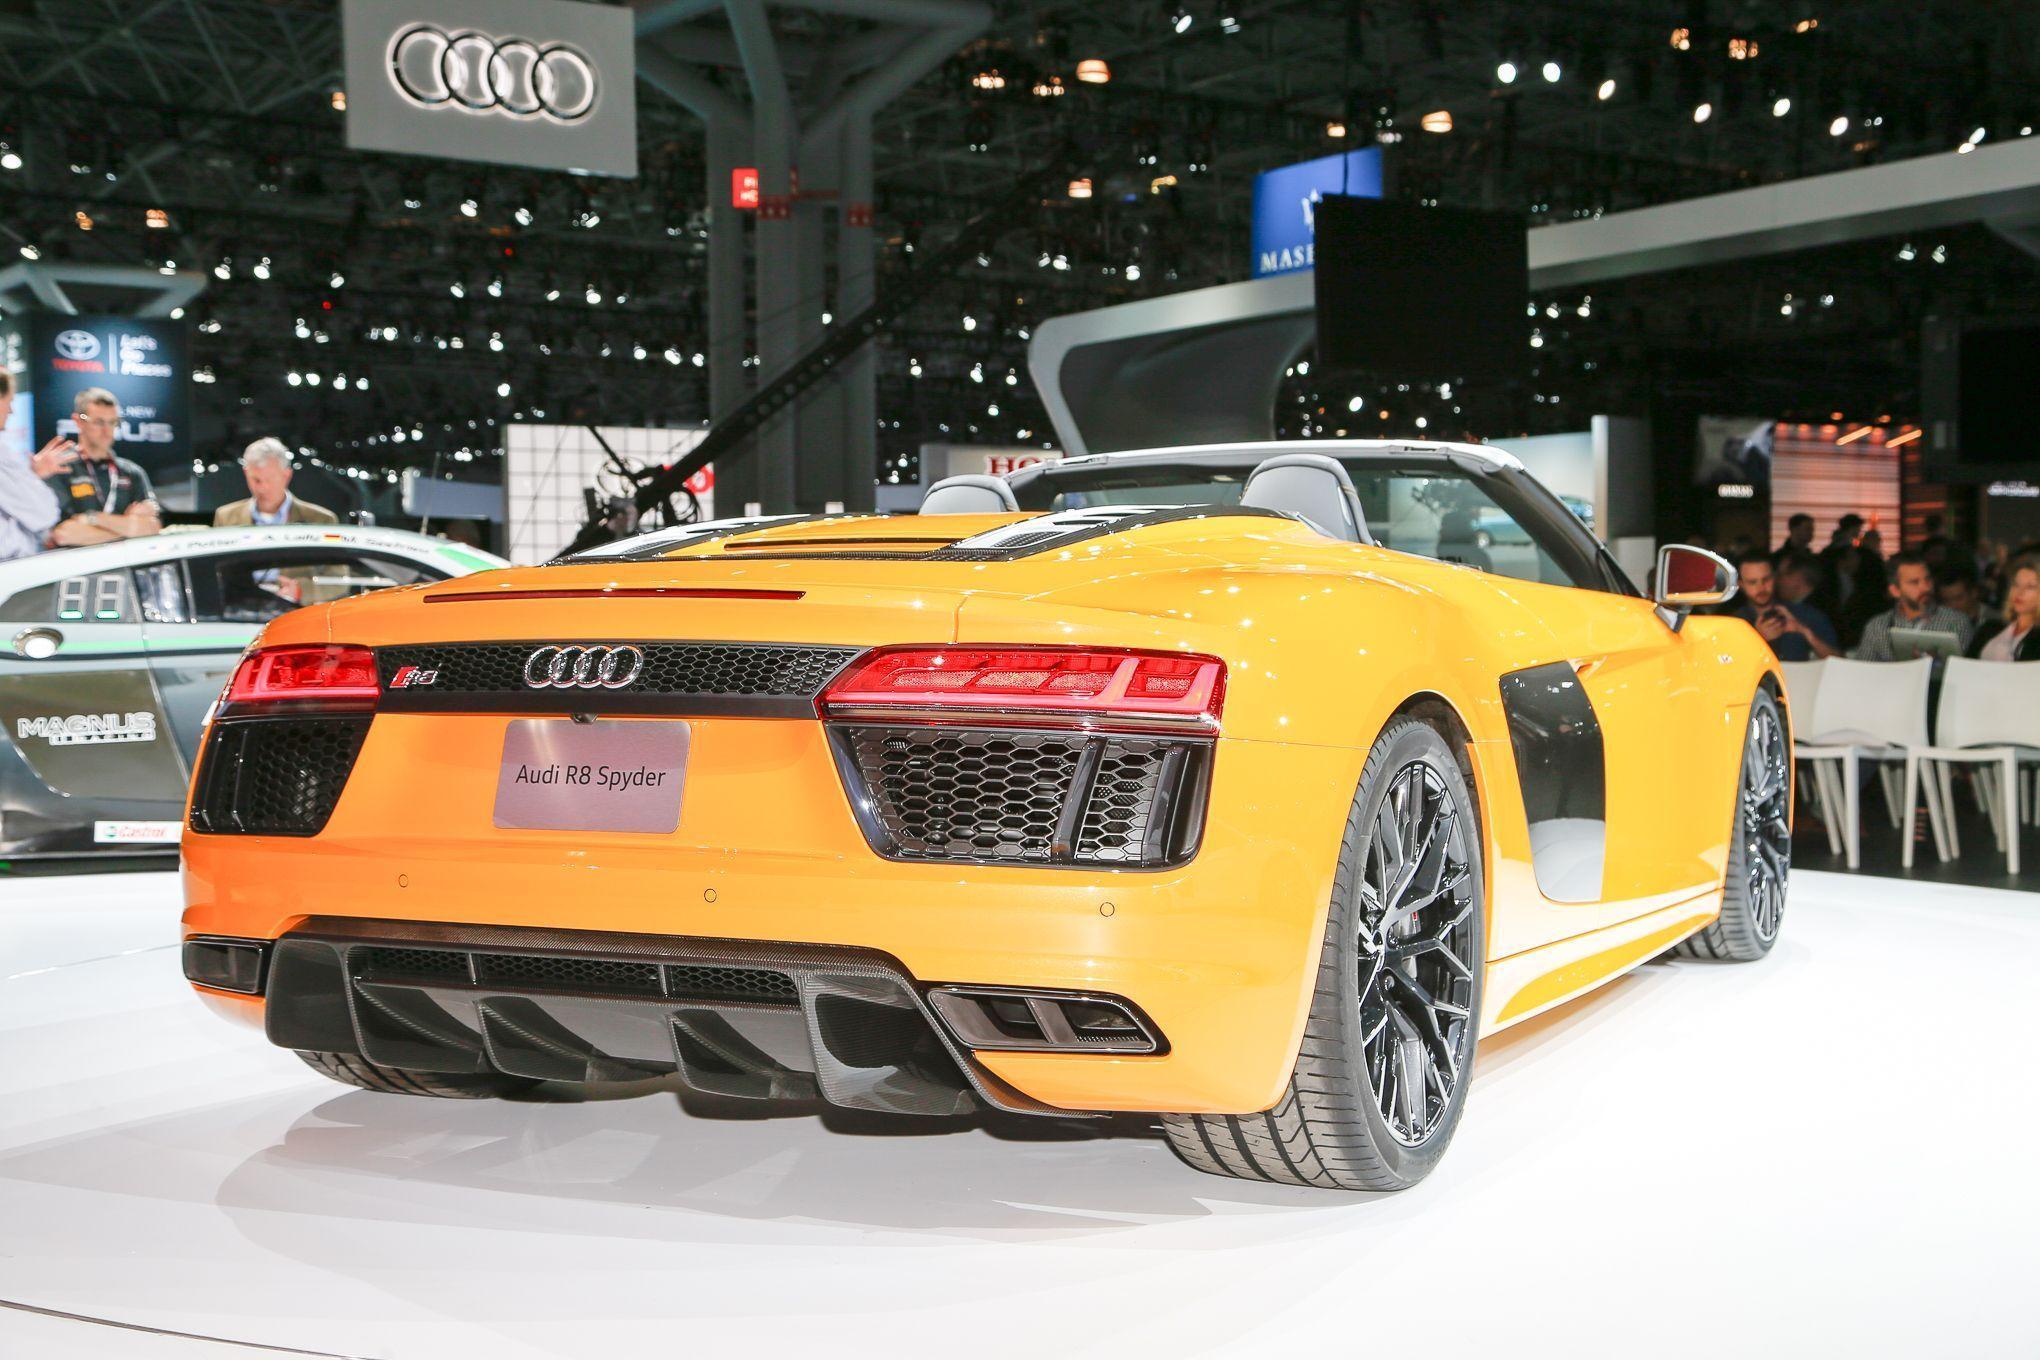 Audi R8 Spyder Wallpaper Free Automatic Youtube Dimensions